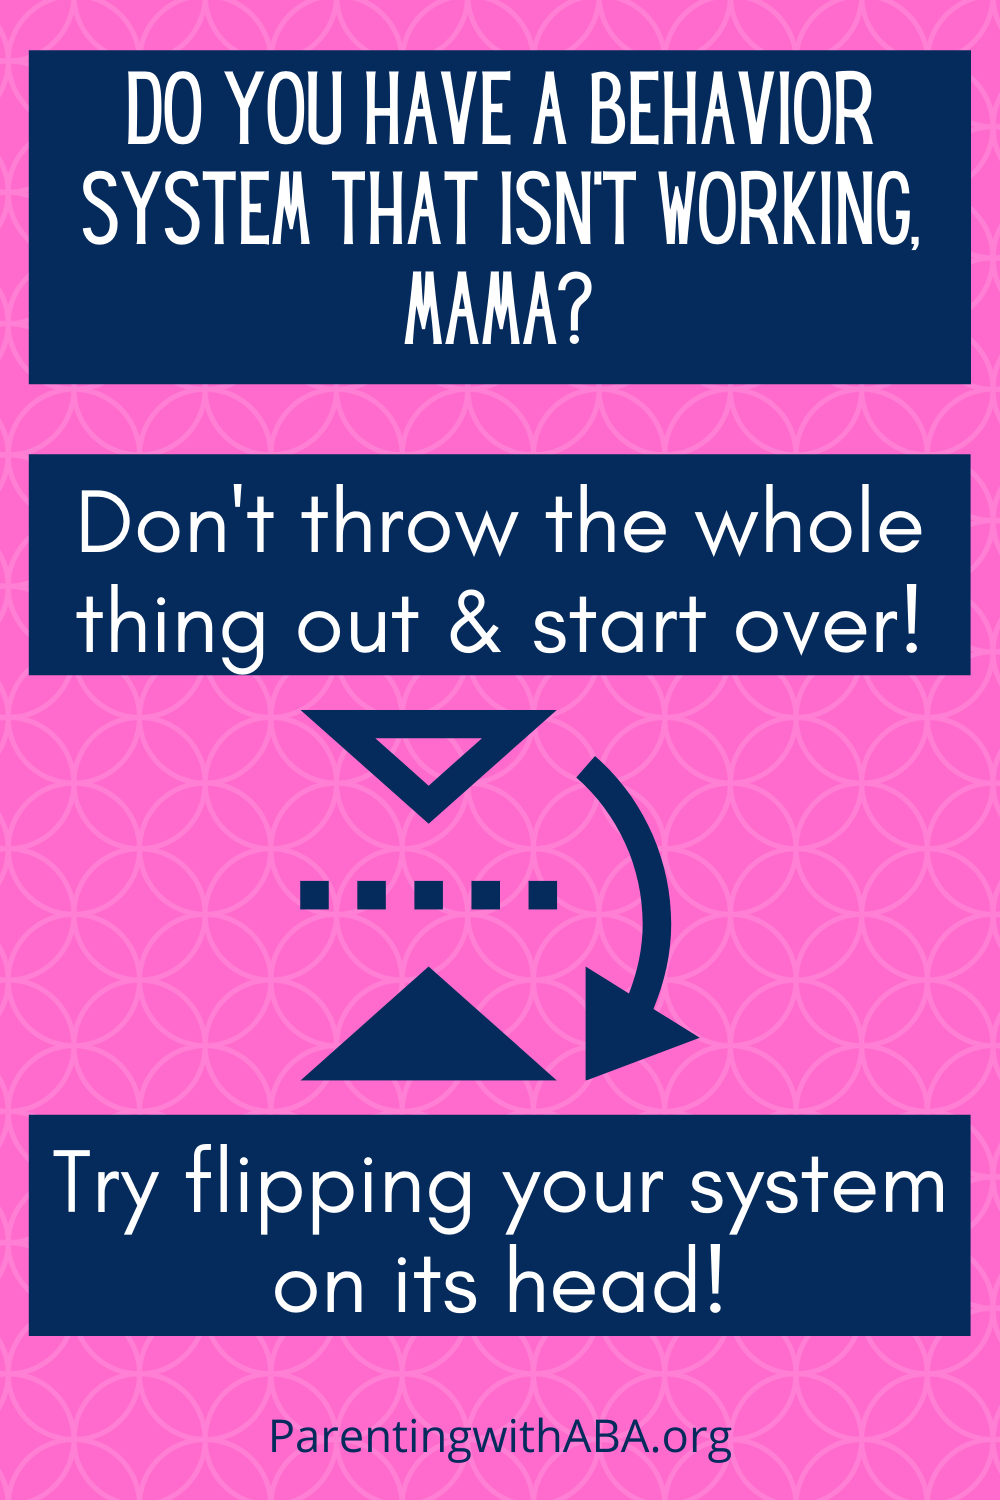 Text: Do you have a behavior system that isn't working, Mama